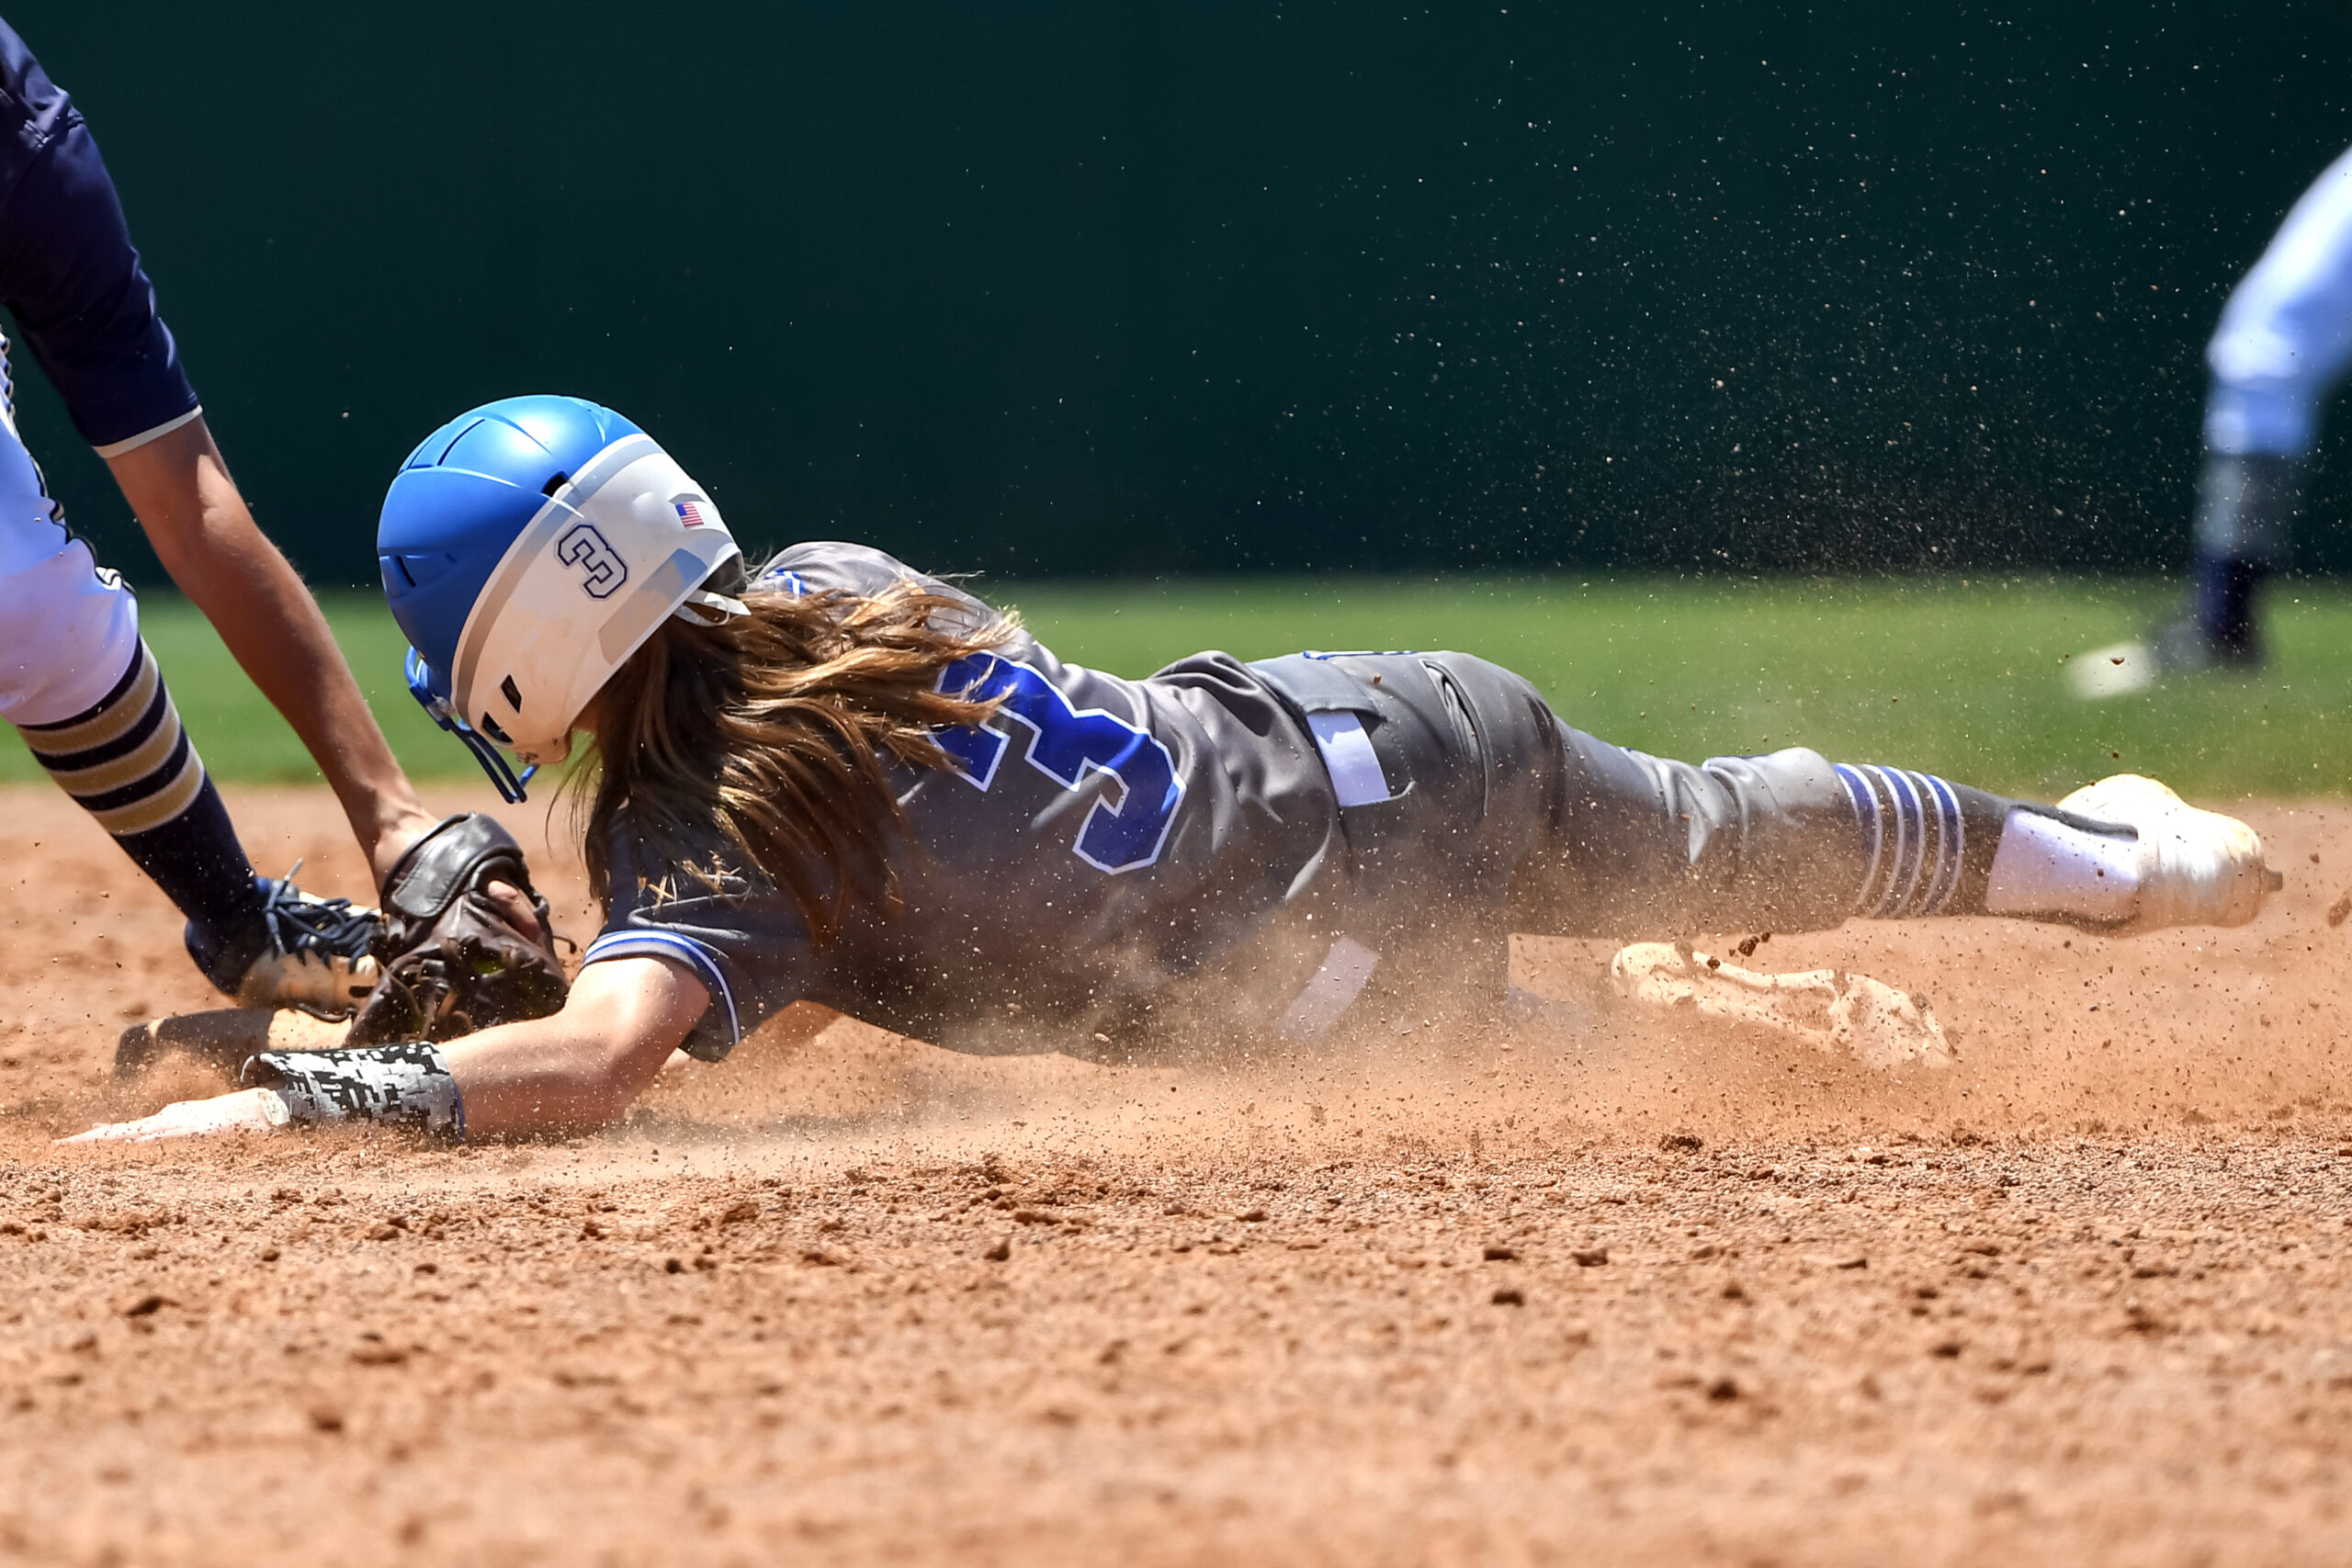 A young player at softball camp slides onto a base headfirst while protected by amateur sports insurance.